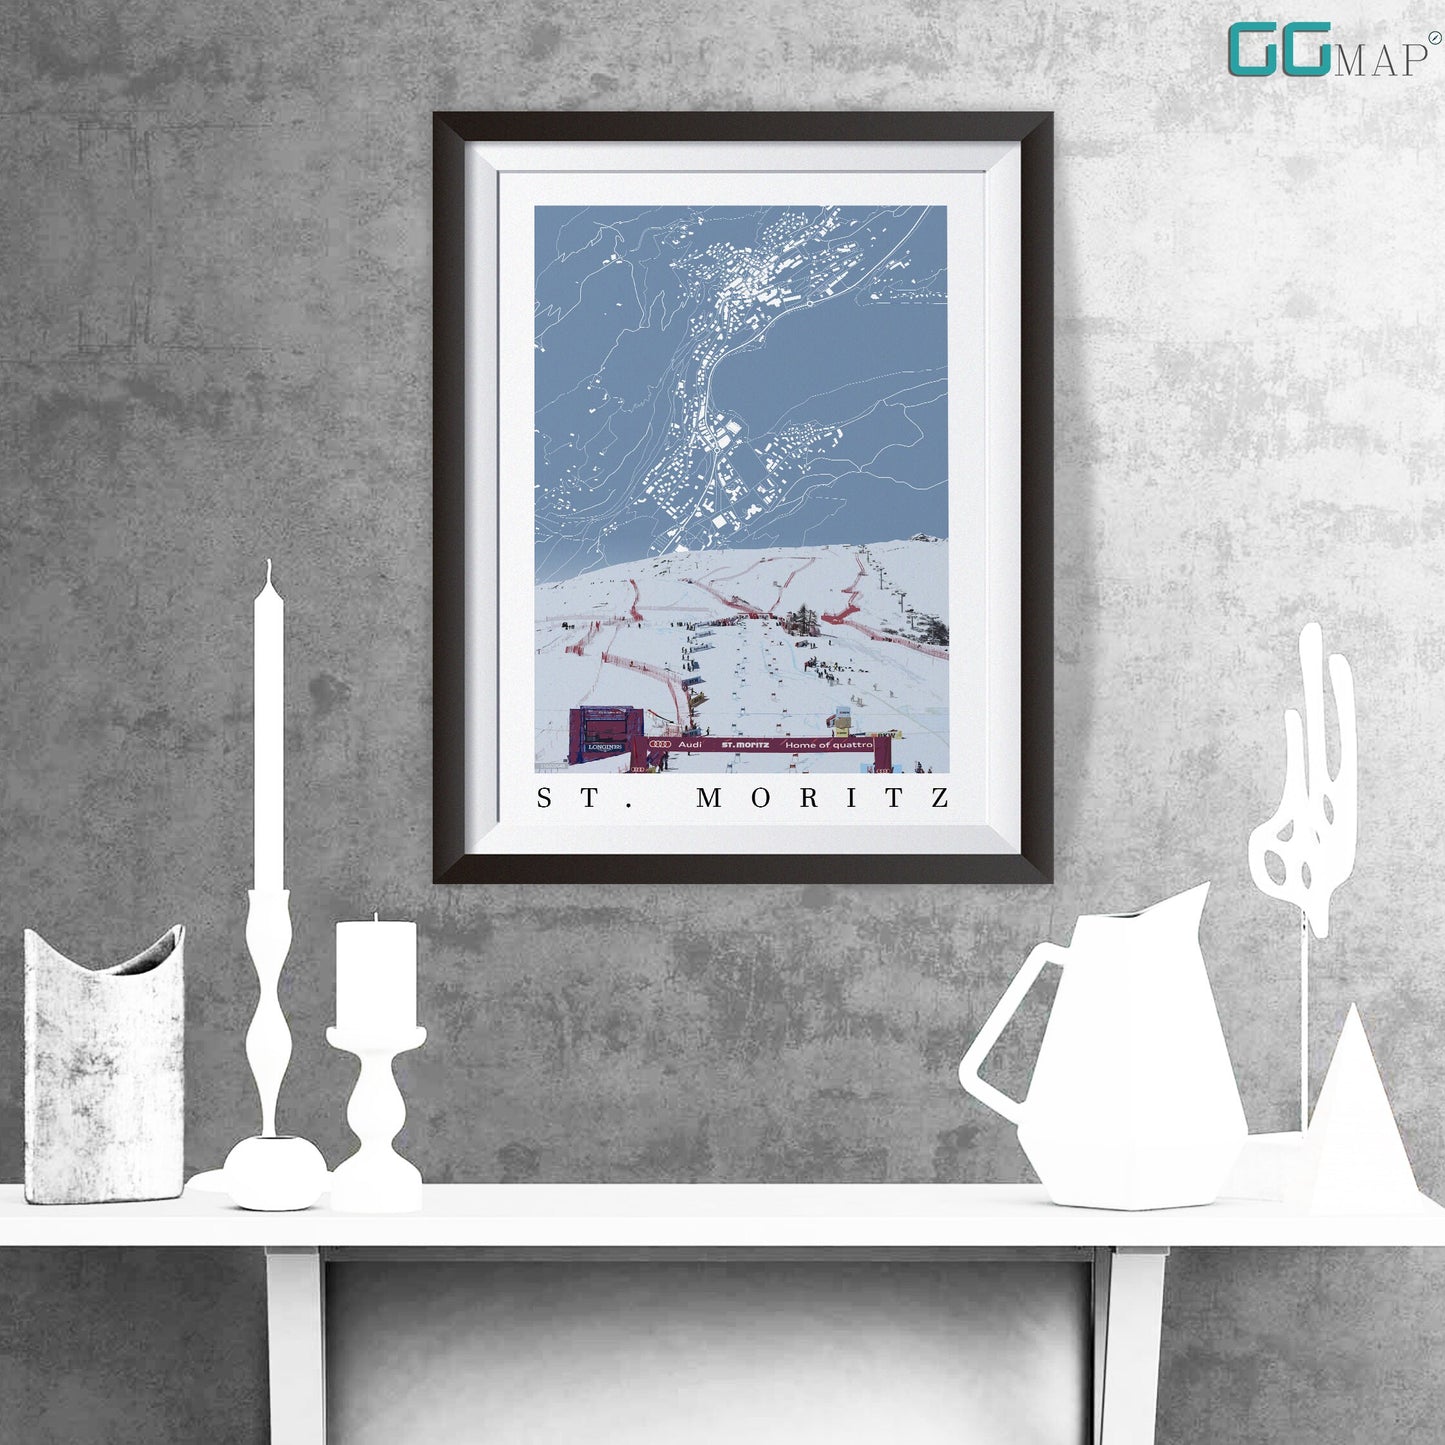 City map of ST. Moritz - St. Moritz  skiing - St. Moritz  skiing adventure -ST. Moritz  gift - ST. Moritz  World cup - Skiing poster